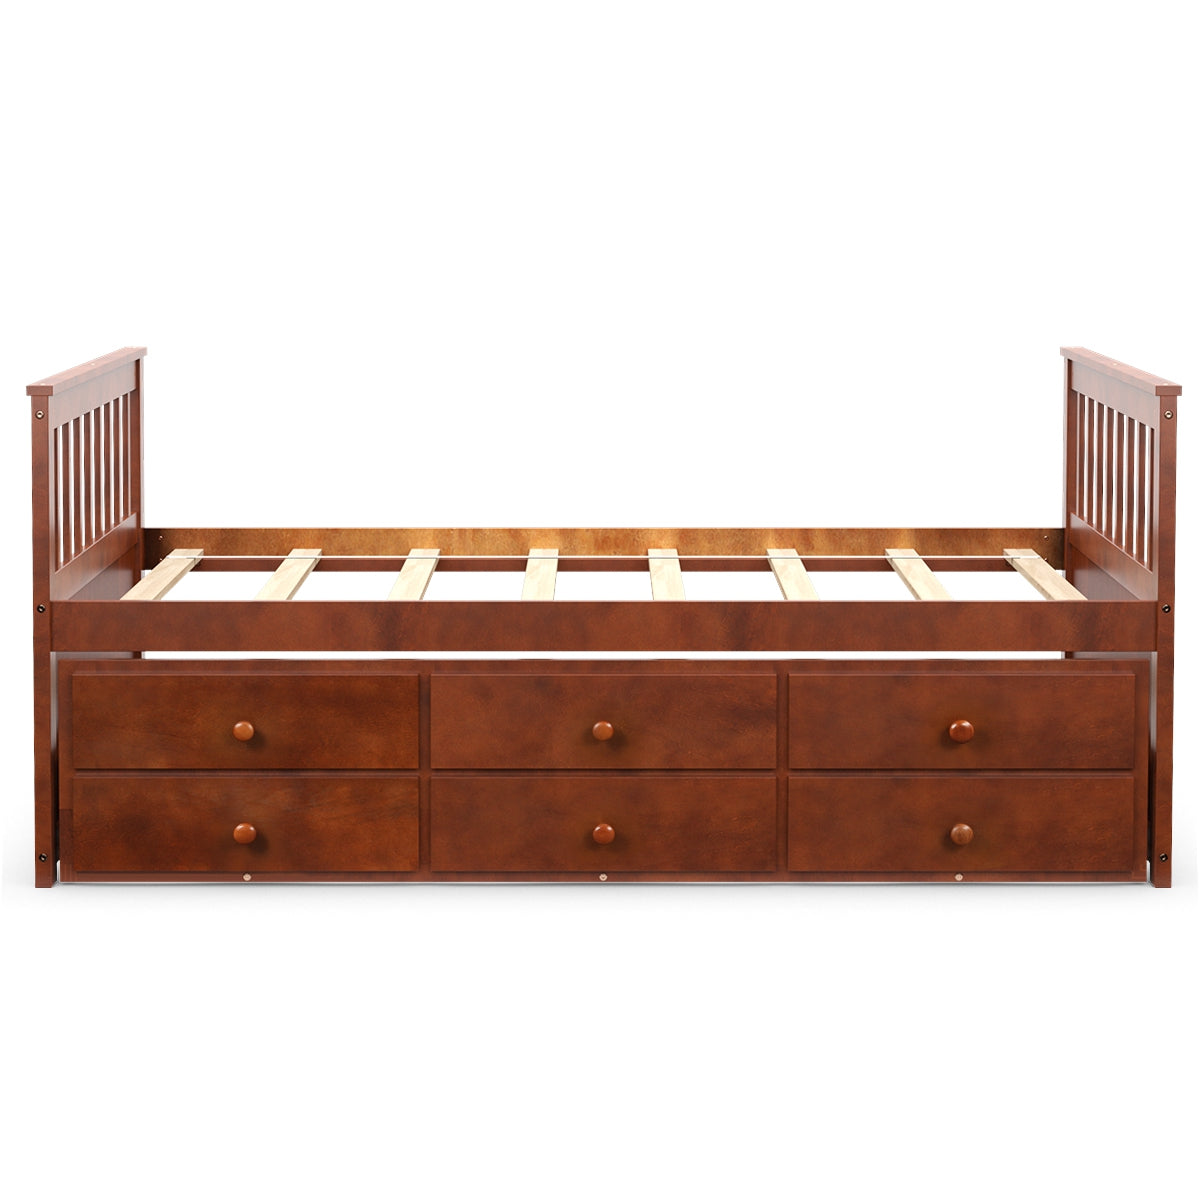 Giantex Twin Captain's Bed with Trundle Bed, Wood Storage Daybed with 3 Storage Drawers